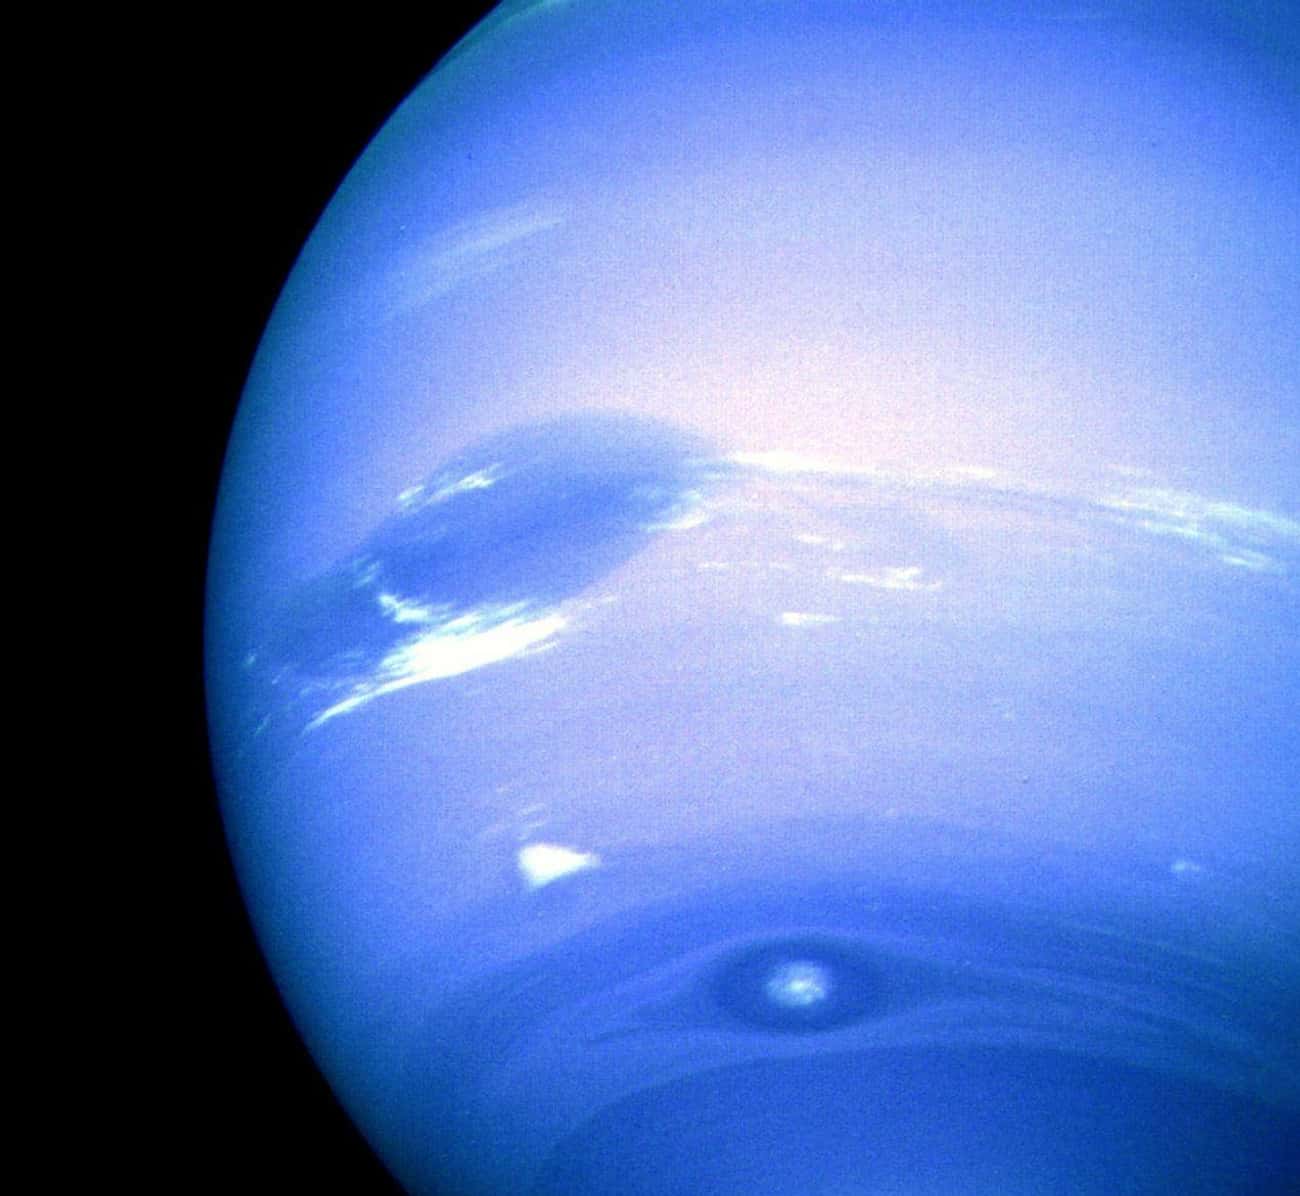 Eviscerated by Flying Ice Shards on Neptune